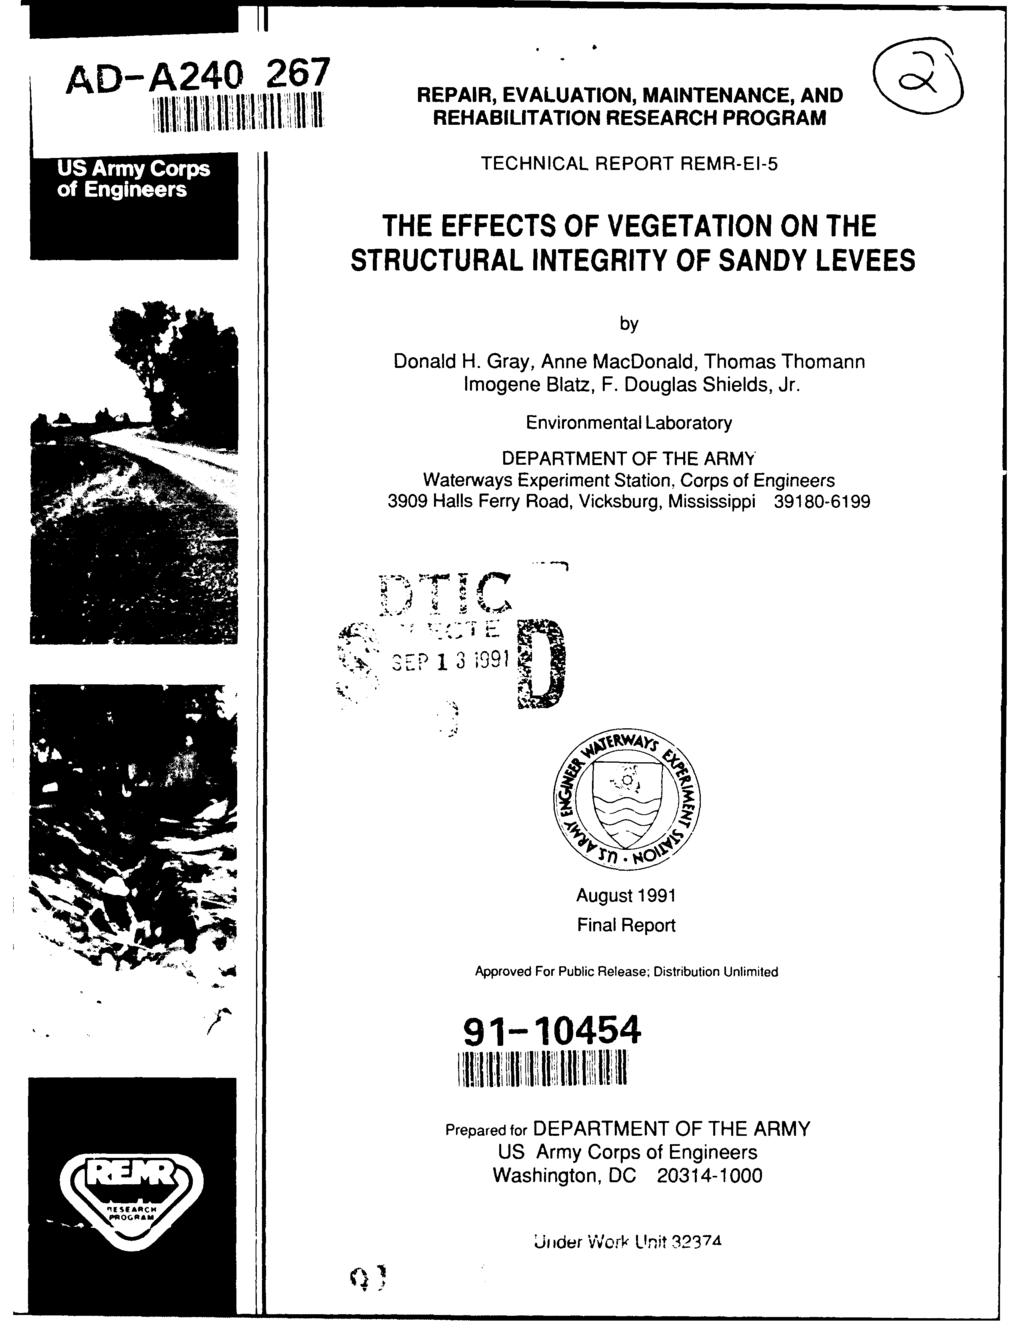 AD- A240 267 REPAIR, EVALUATION, MAINTENANCE, AND OK ti' irehabilitation RESEARCH PROGRAM UTECHNICAL REPORT REMR-EI-5 THE EFFECTS OF VEGETATION ON THE STRUCTURAL INTEGRITY OF SANDY LEVEES by Donald H.